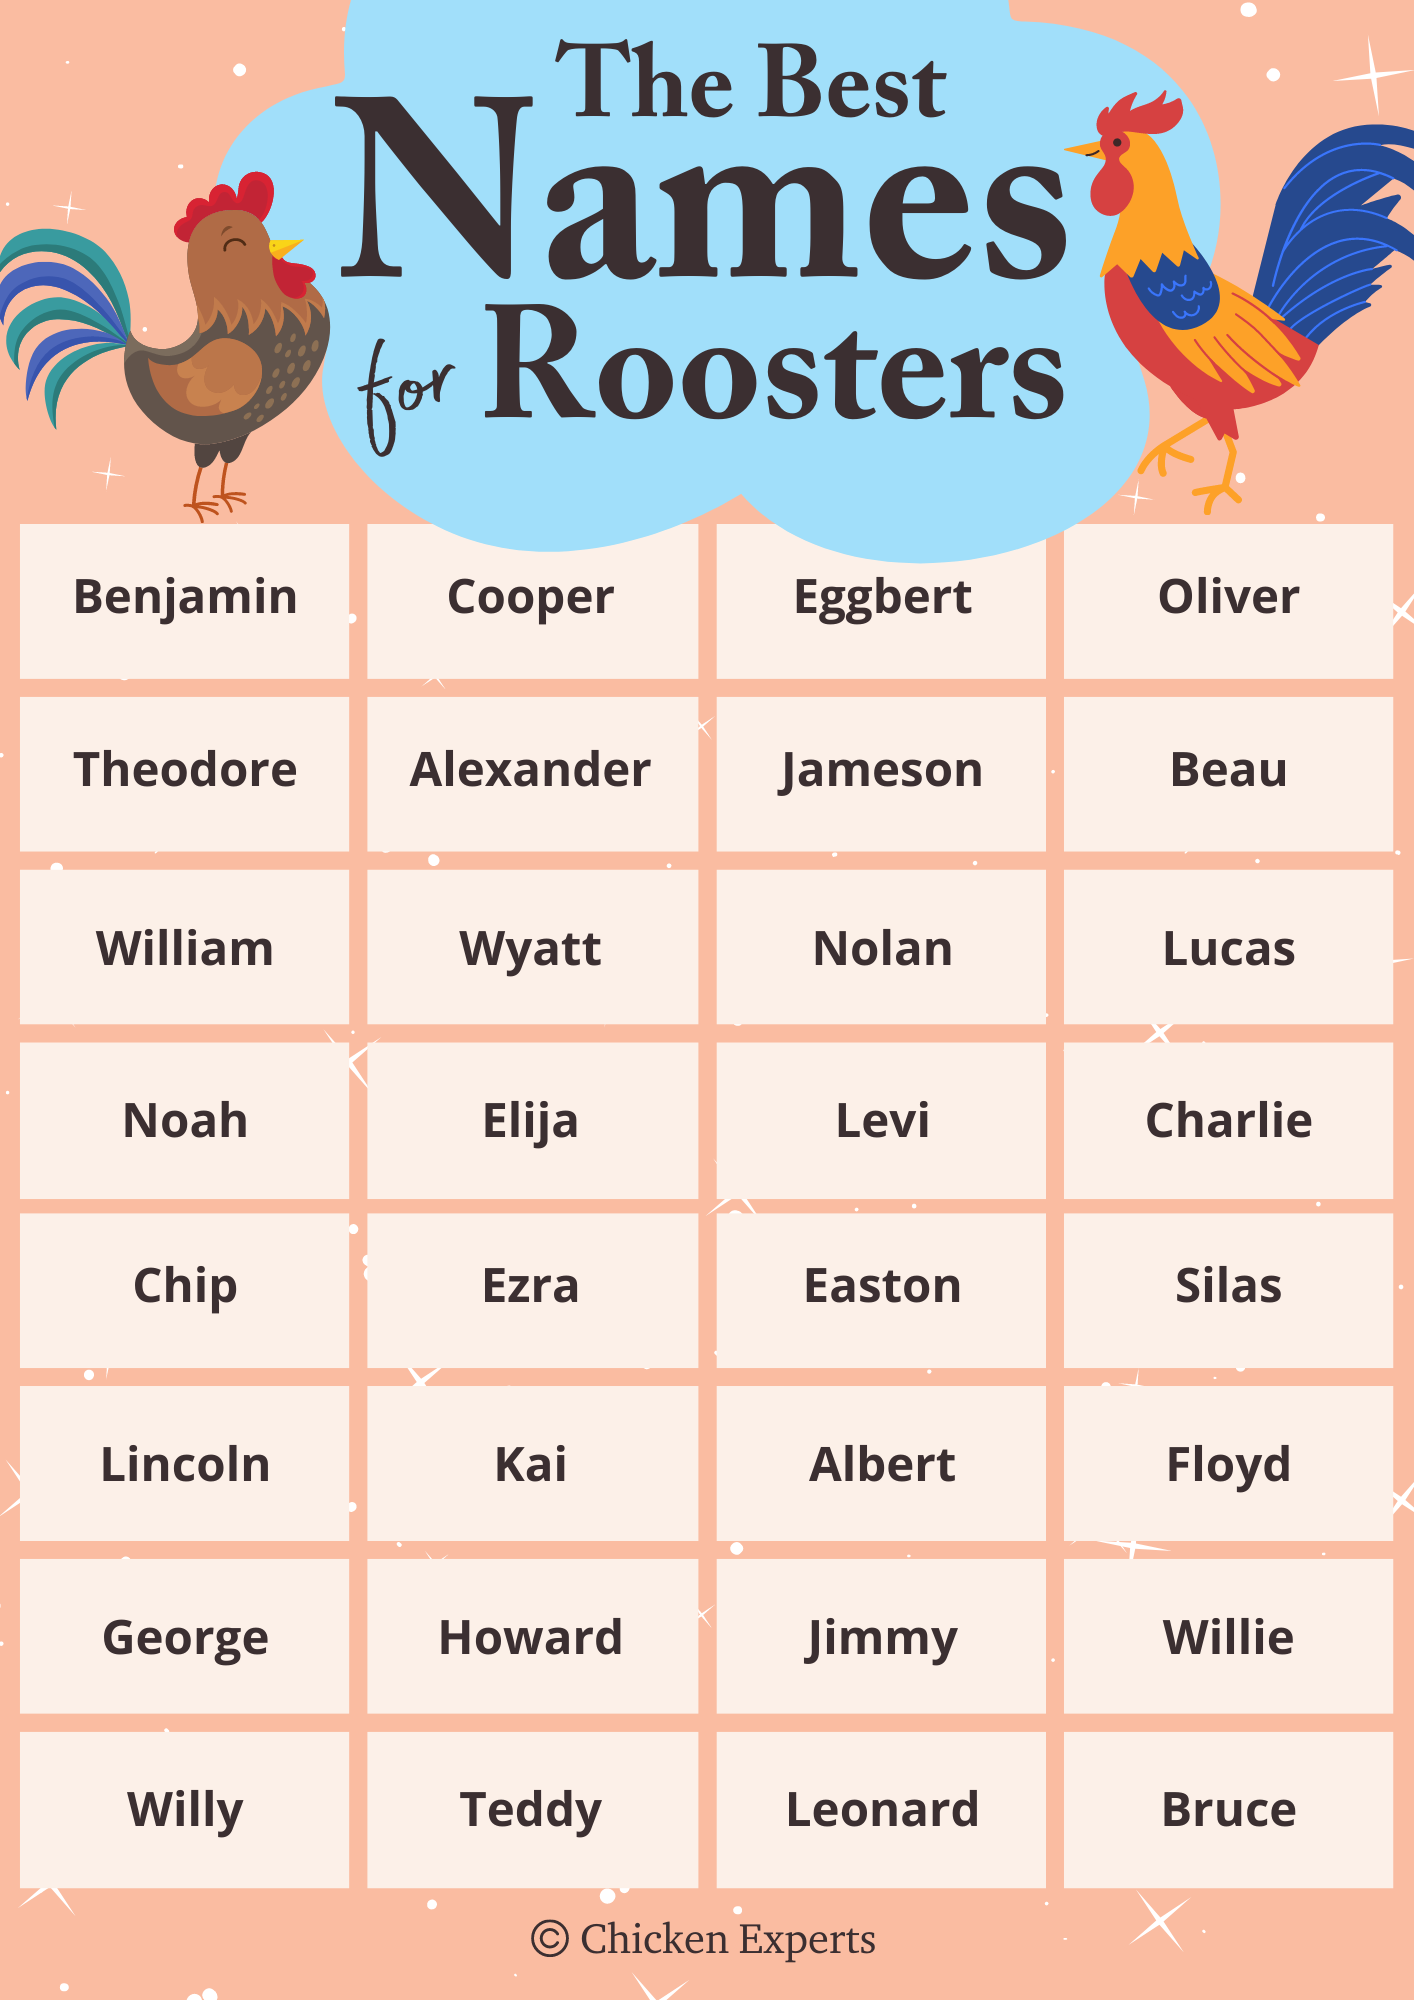 boys' names for roosters